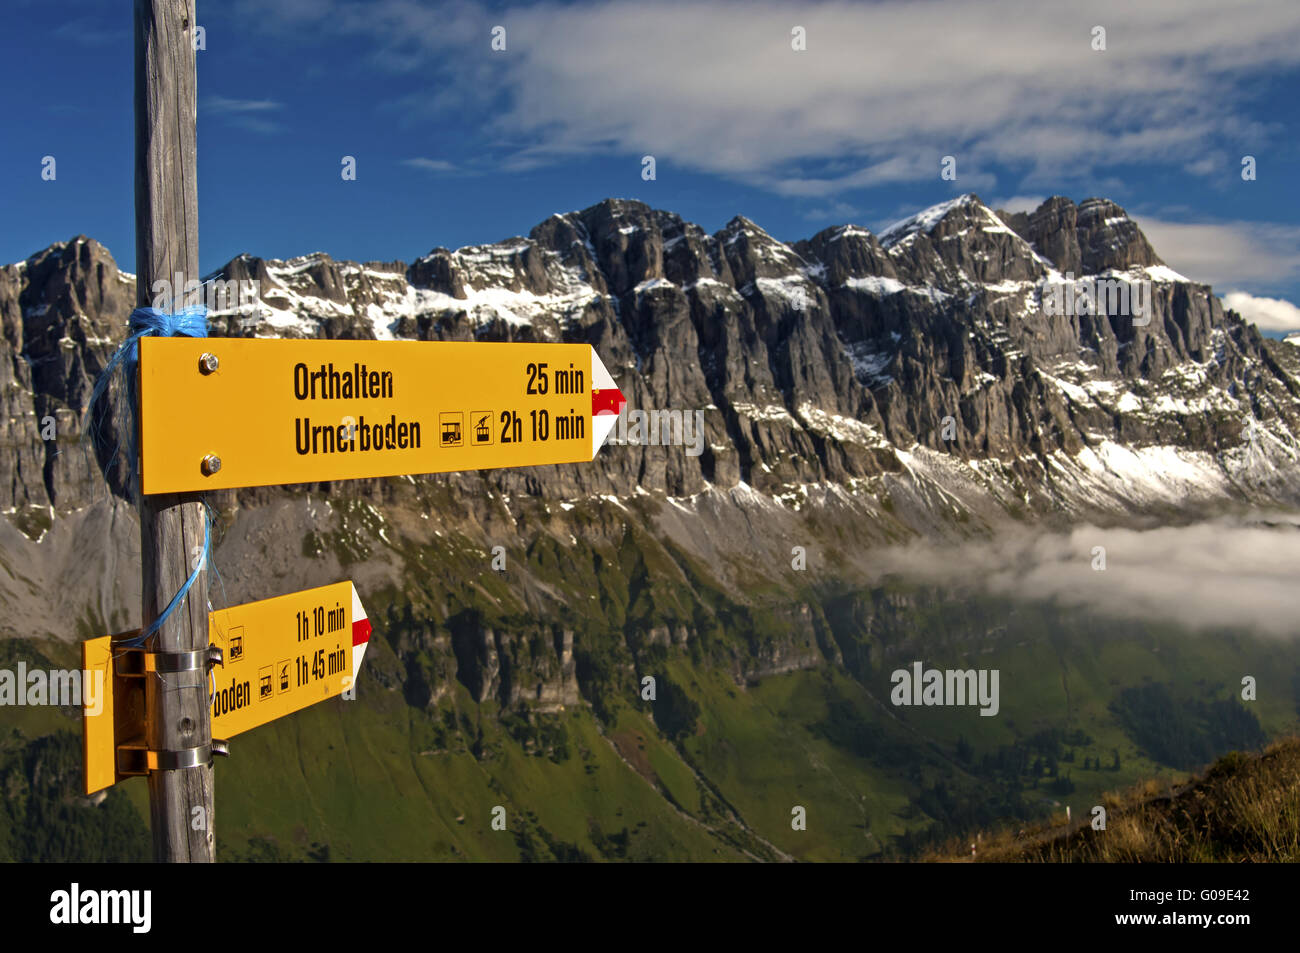 Directional sign in the hiking area Urnerboden Stock Photo